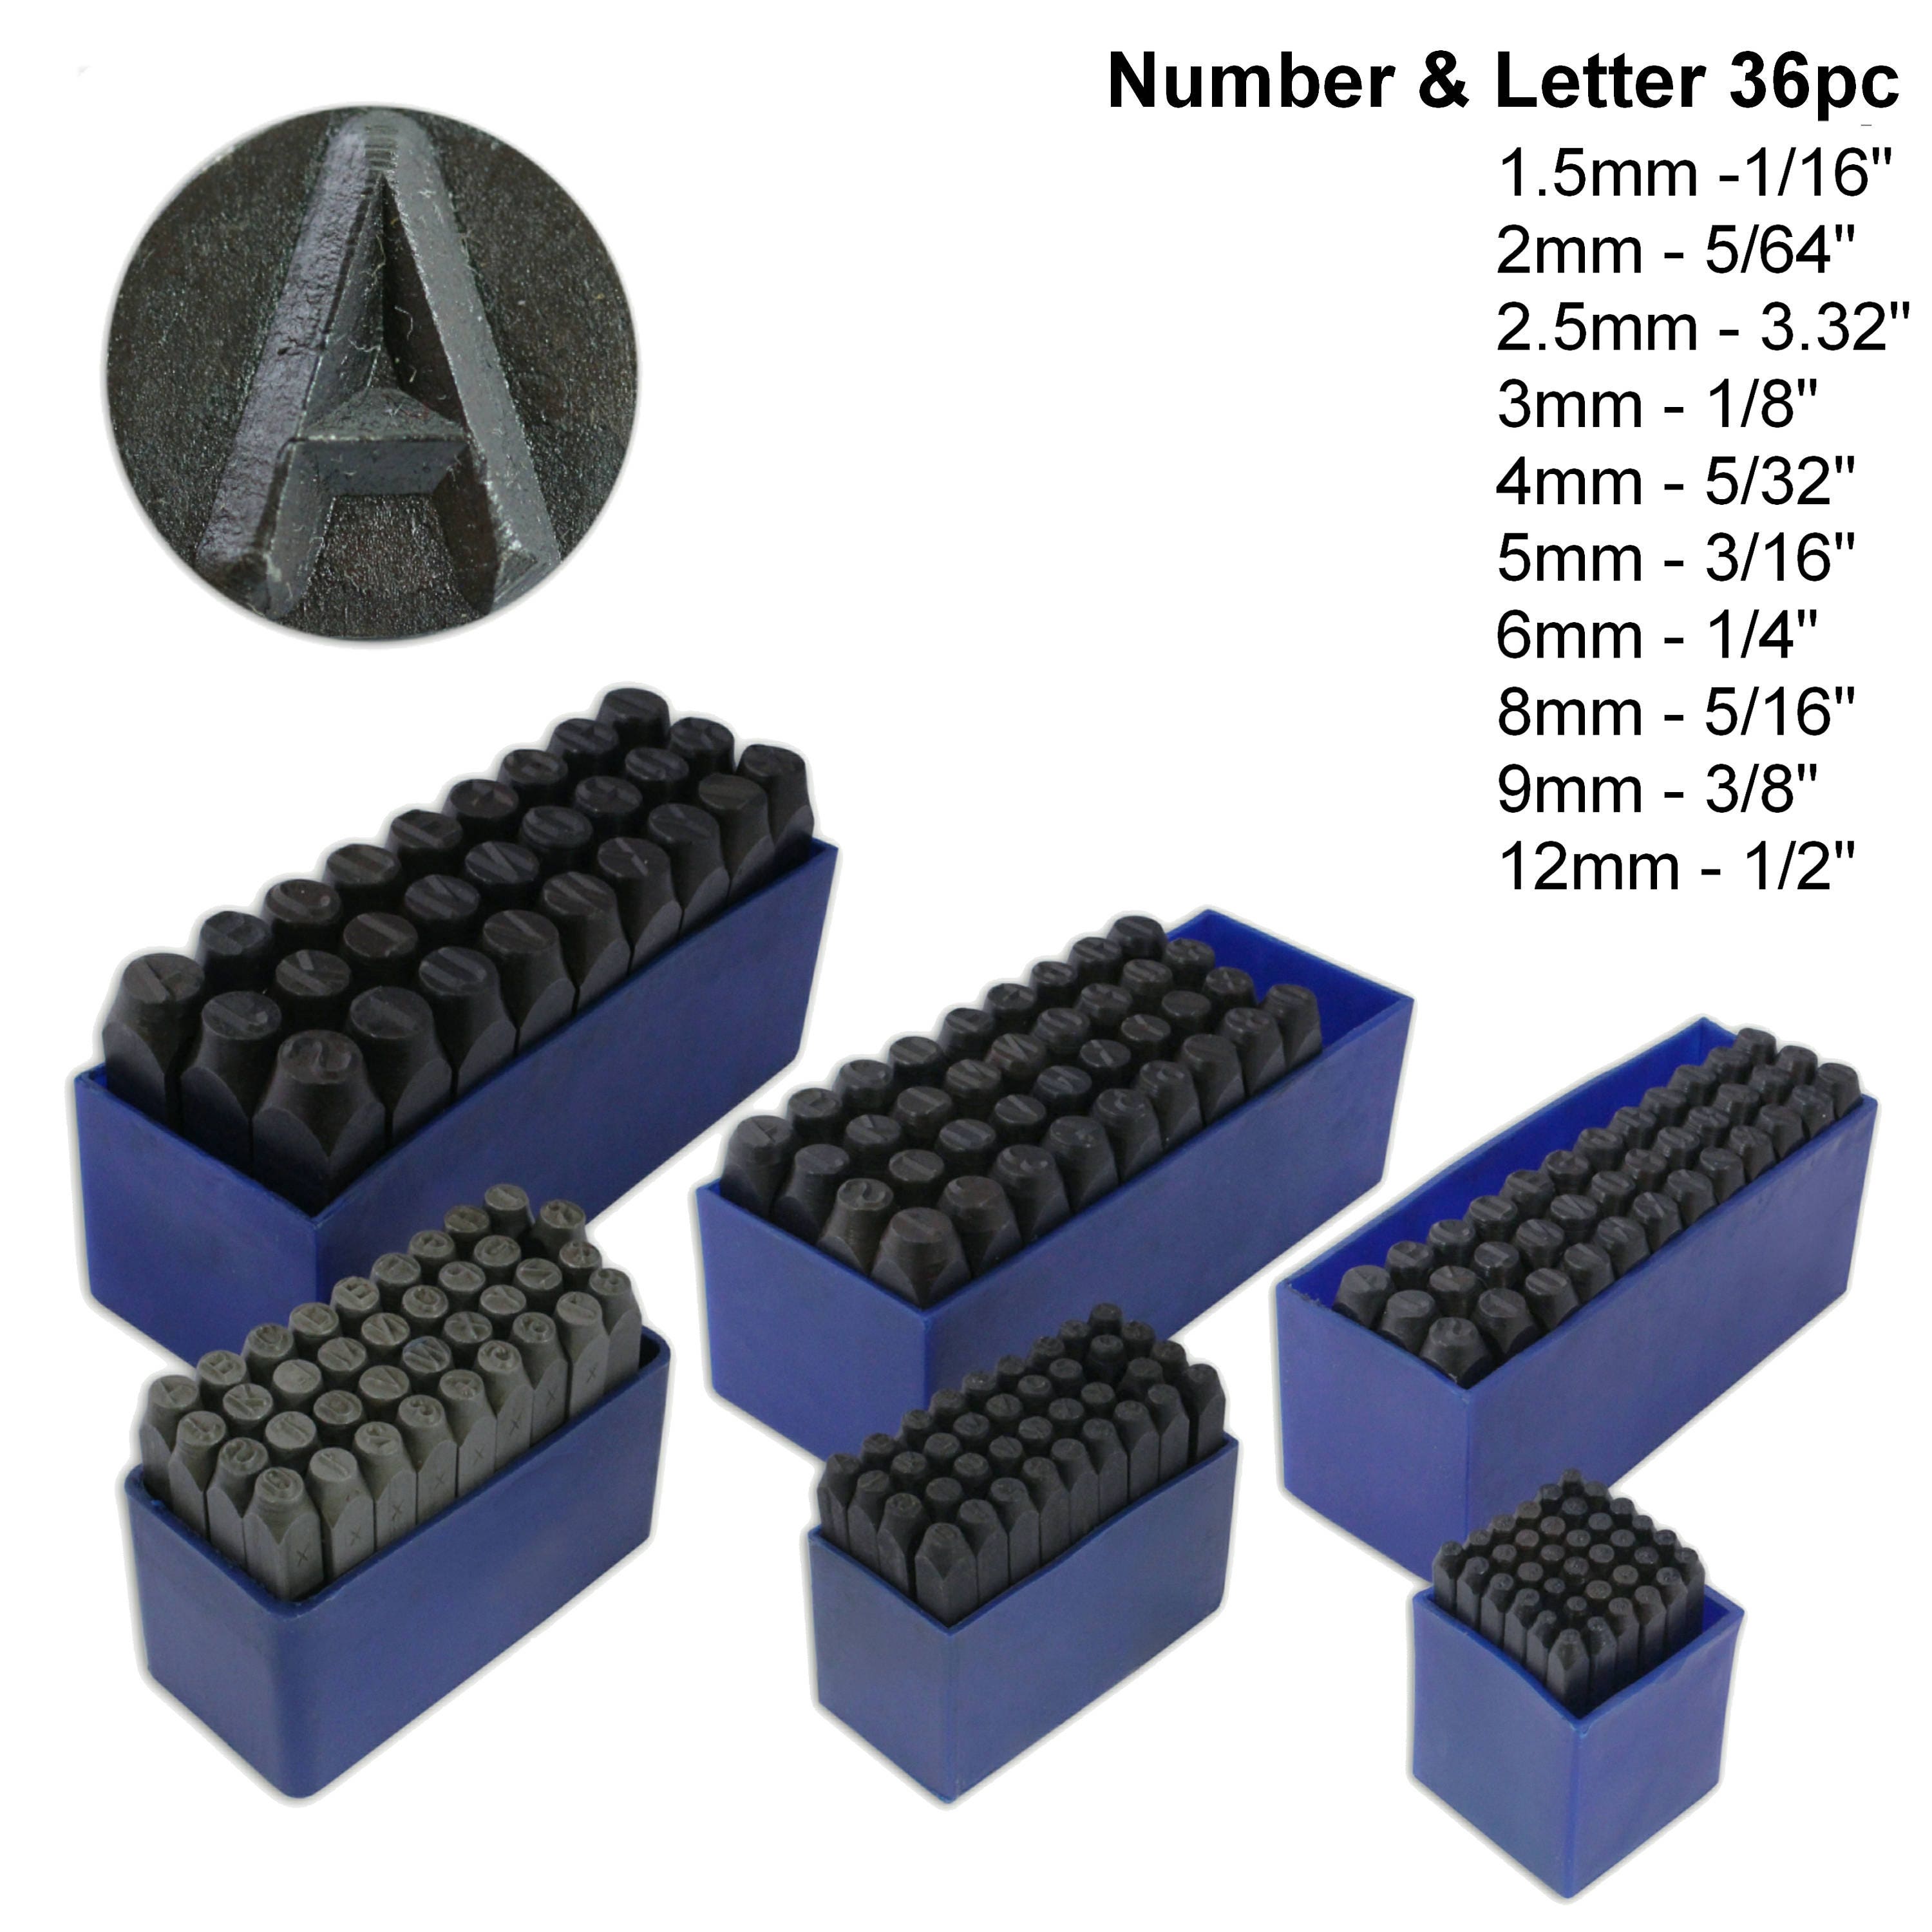 A-Z & 0-9 36pc x 2 mm or 5/64" Letter & number stamp punch 